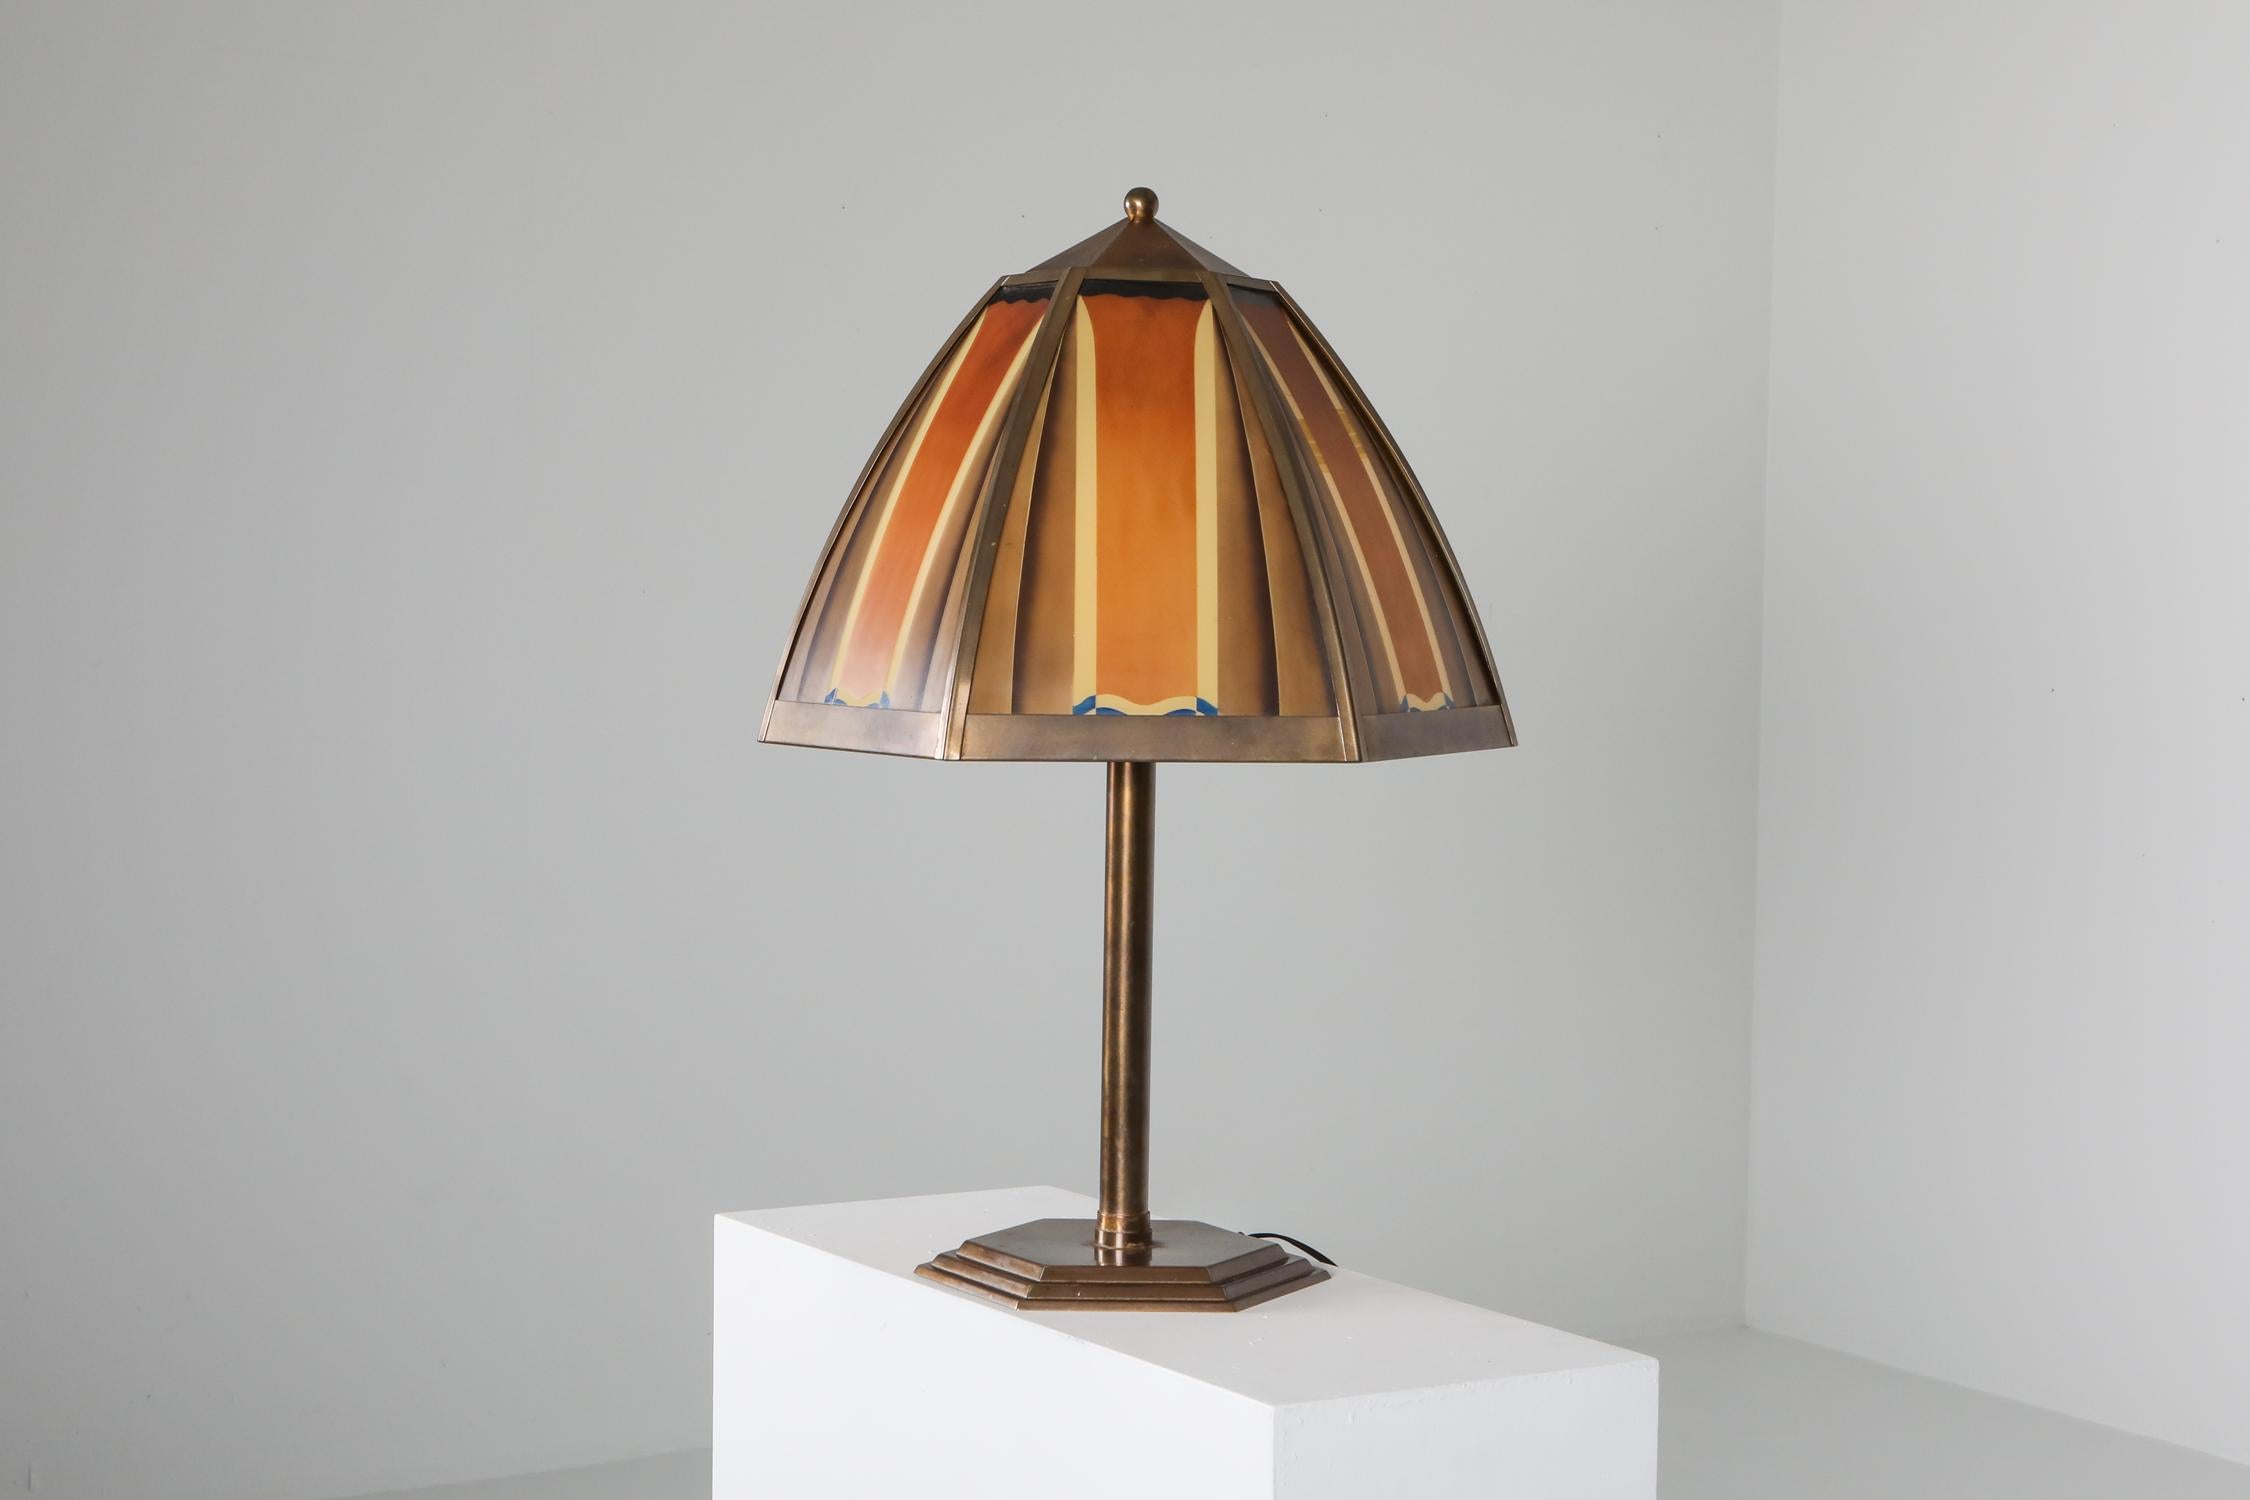 Bronze table lamp, Amsterdam School, Art Deco era, Netherlands 1920s


From an important Dutch private collection.
The exact designer is unknown.
The piece is attributed to the more traditionalist designers of the Amsterdam School era.
Top